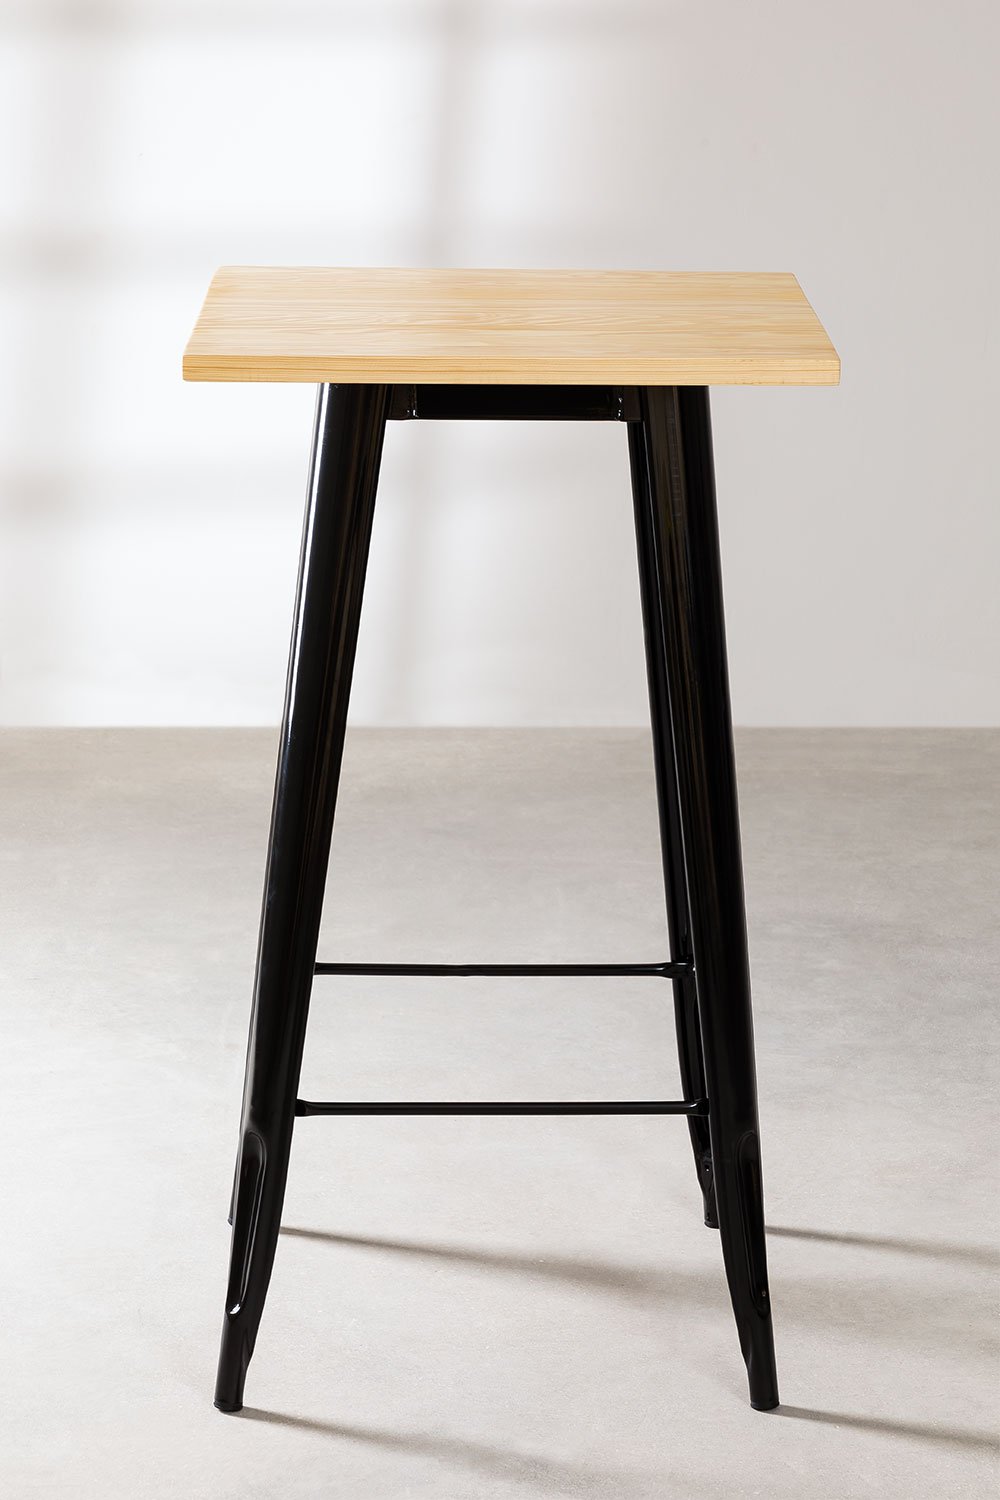 Wood & Steel Square High Table  (60 x 60 cm) LIX, gallery image 2